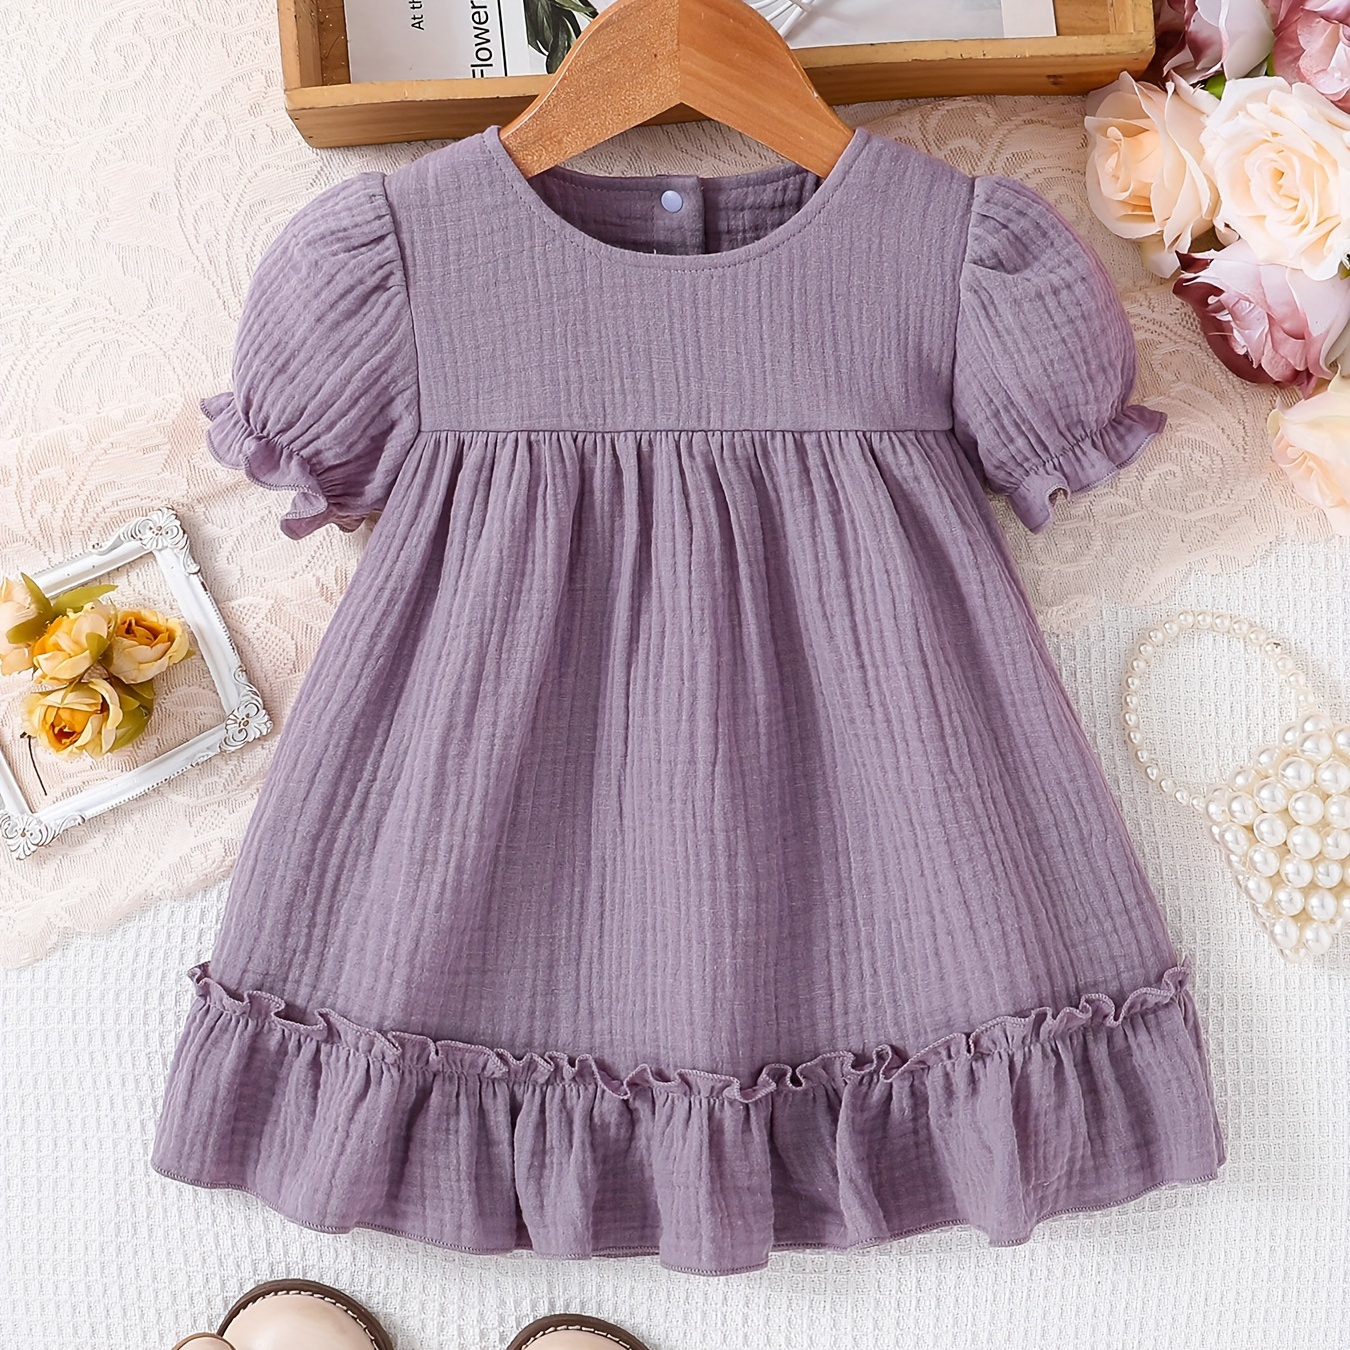 

Baby's Casual Solid Color Comfy Cotton Dress, Ruffle Trim Puff Sleeve Dress, Infant & Toddler Girl's Clothing For Summer, As Gift